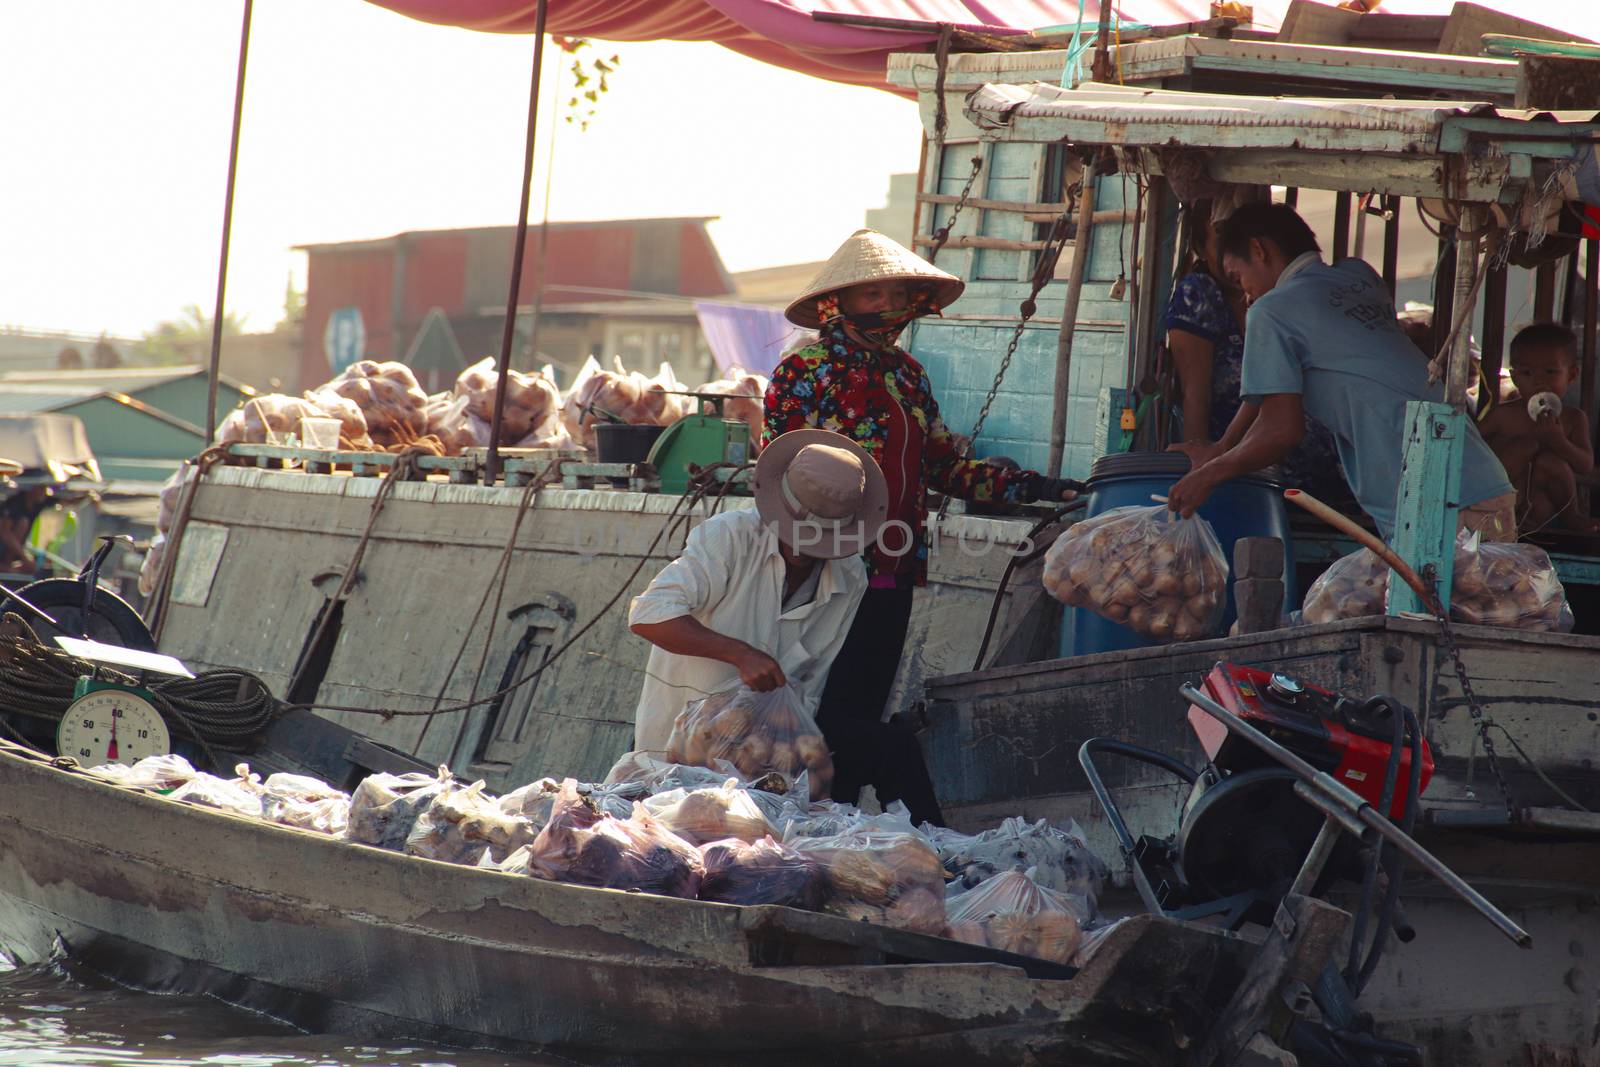 Editorial. Merchants selling fresh produce in Cai Rang Floating Market by Sonnet15